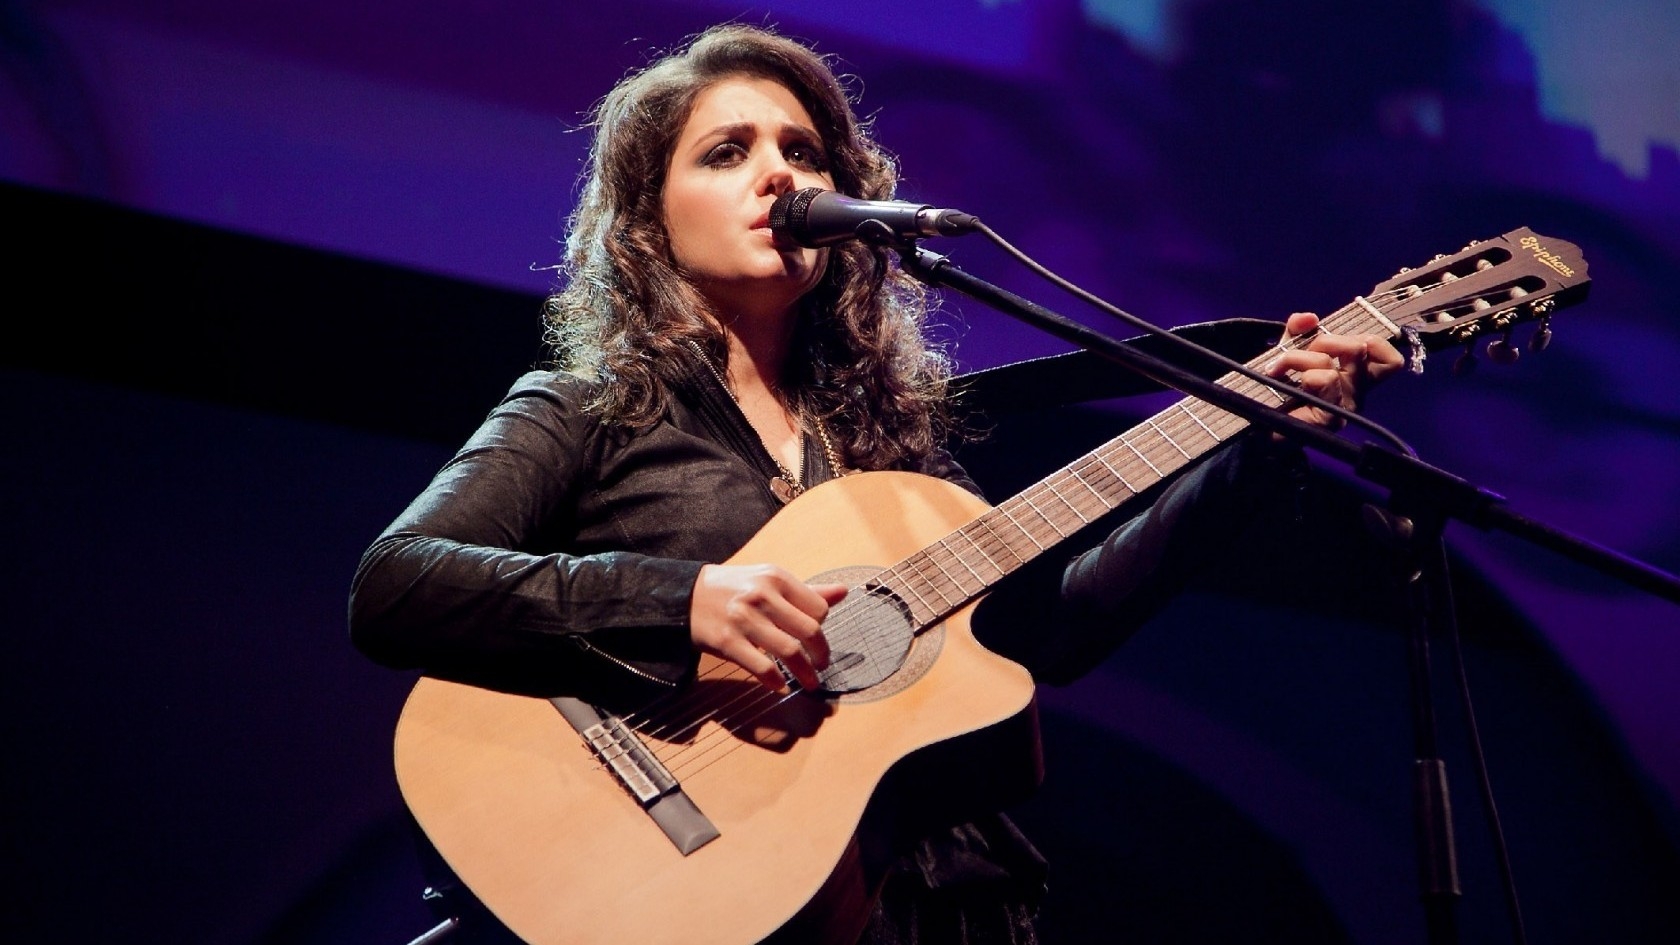 Katie Melua Performing on Stage for 1680 x 945 HDTV resolution